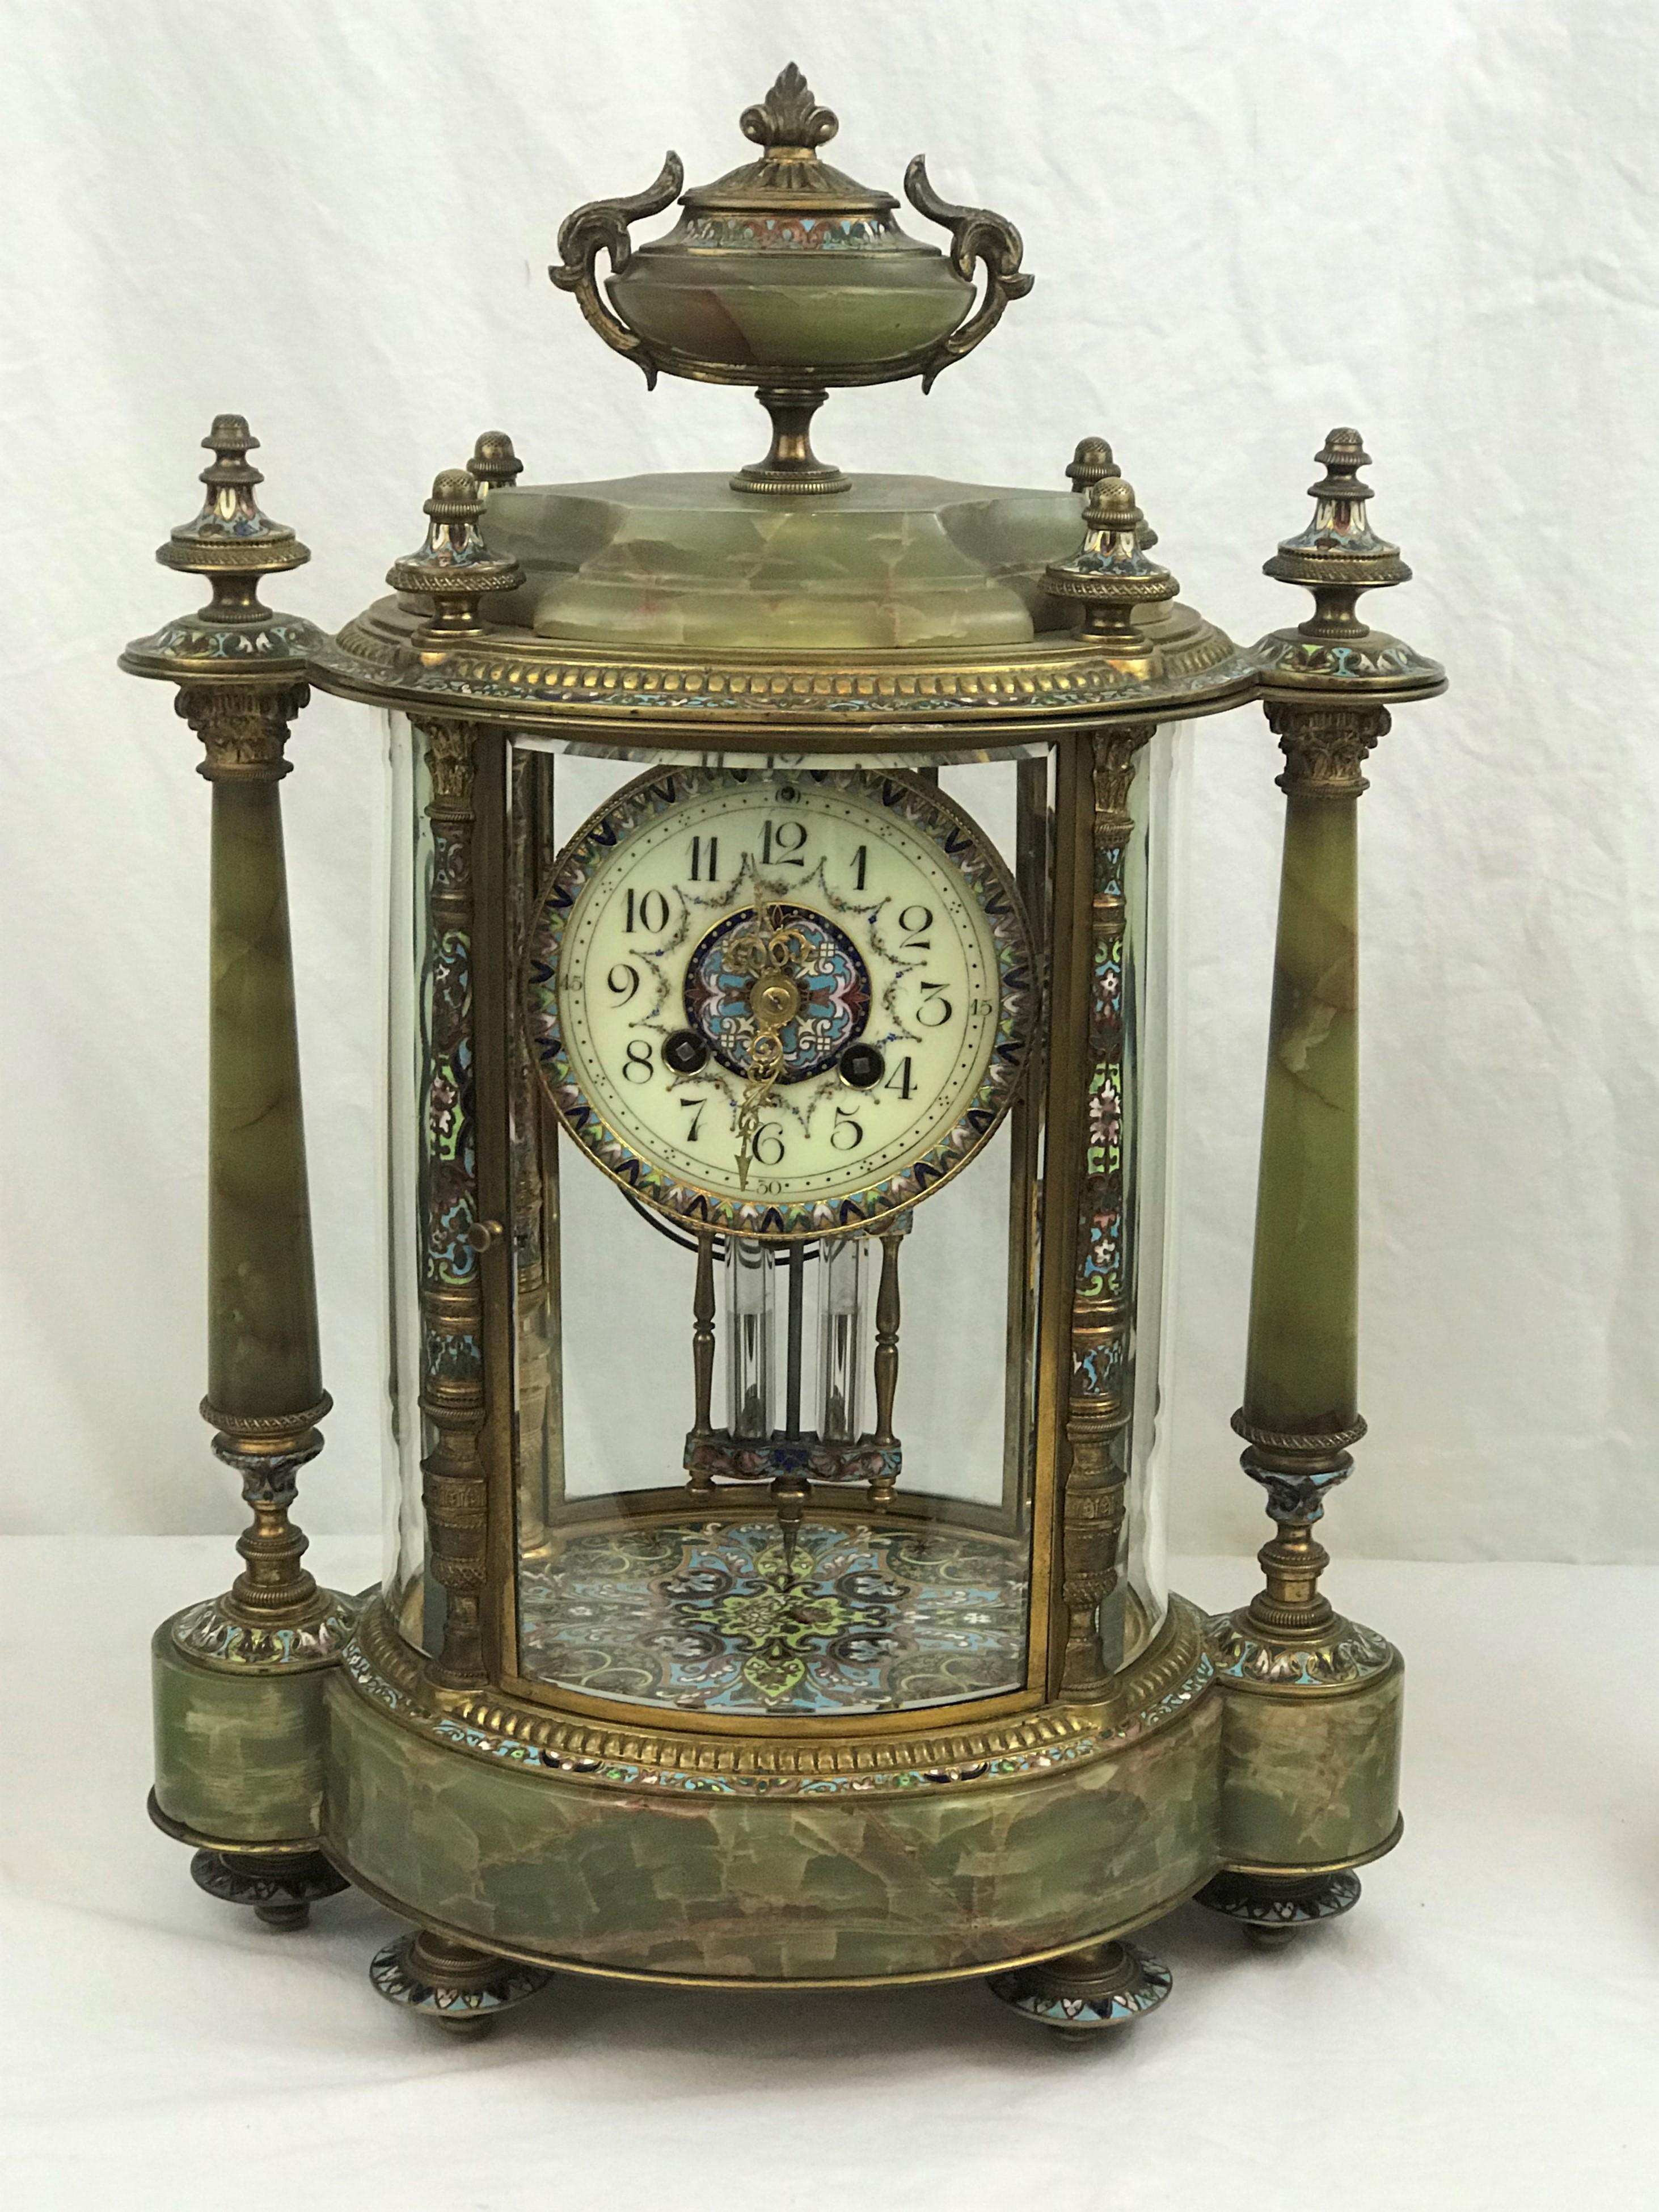 Tiffany & Co. Three piece garniture set. Crystal regulator clock with pair of side urns. Green onyx, cloisonne and ormolu, circa 1900. Excellent condition.

Clock with porcelain and cloisonne dial, cloisonne on pendulum and bottom interior.